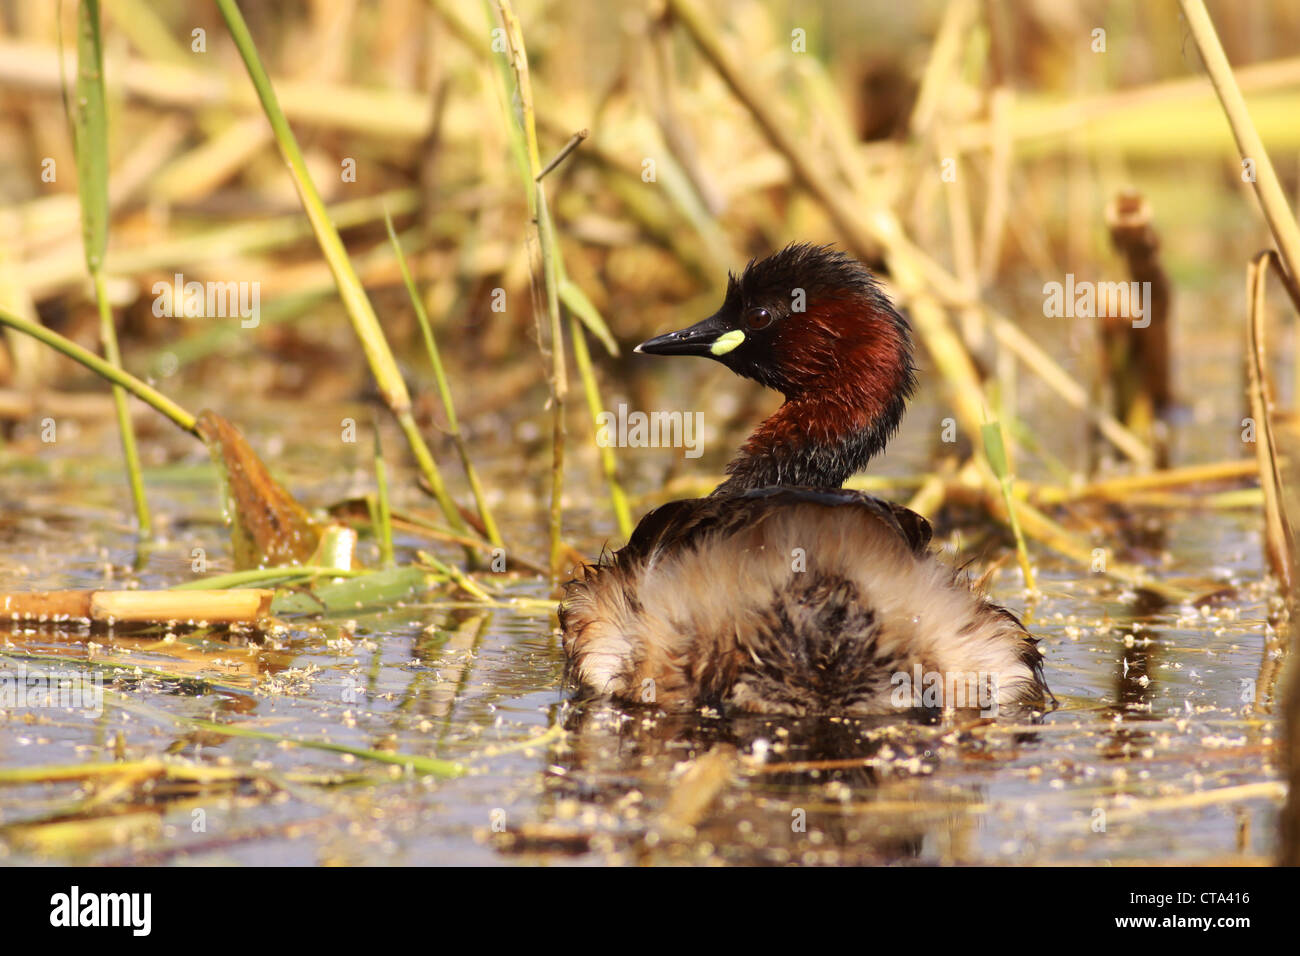 Little Grebe (Tachybaptus ruficollis) in a pond, Photographed in Israel in April Stock Photo